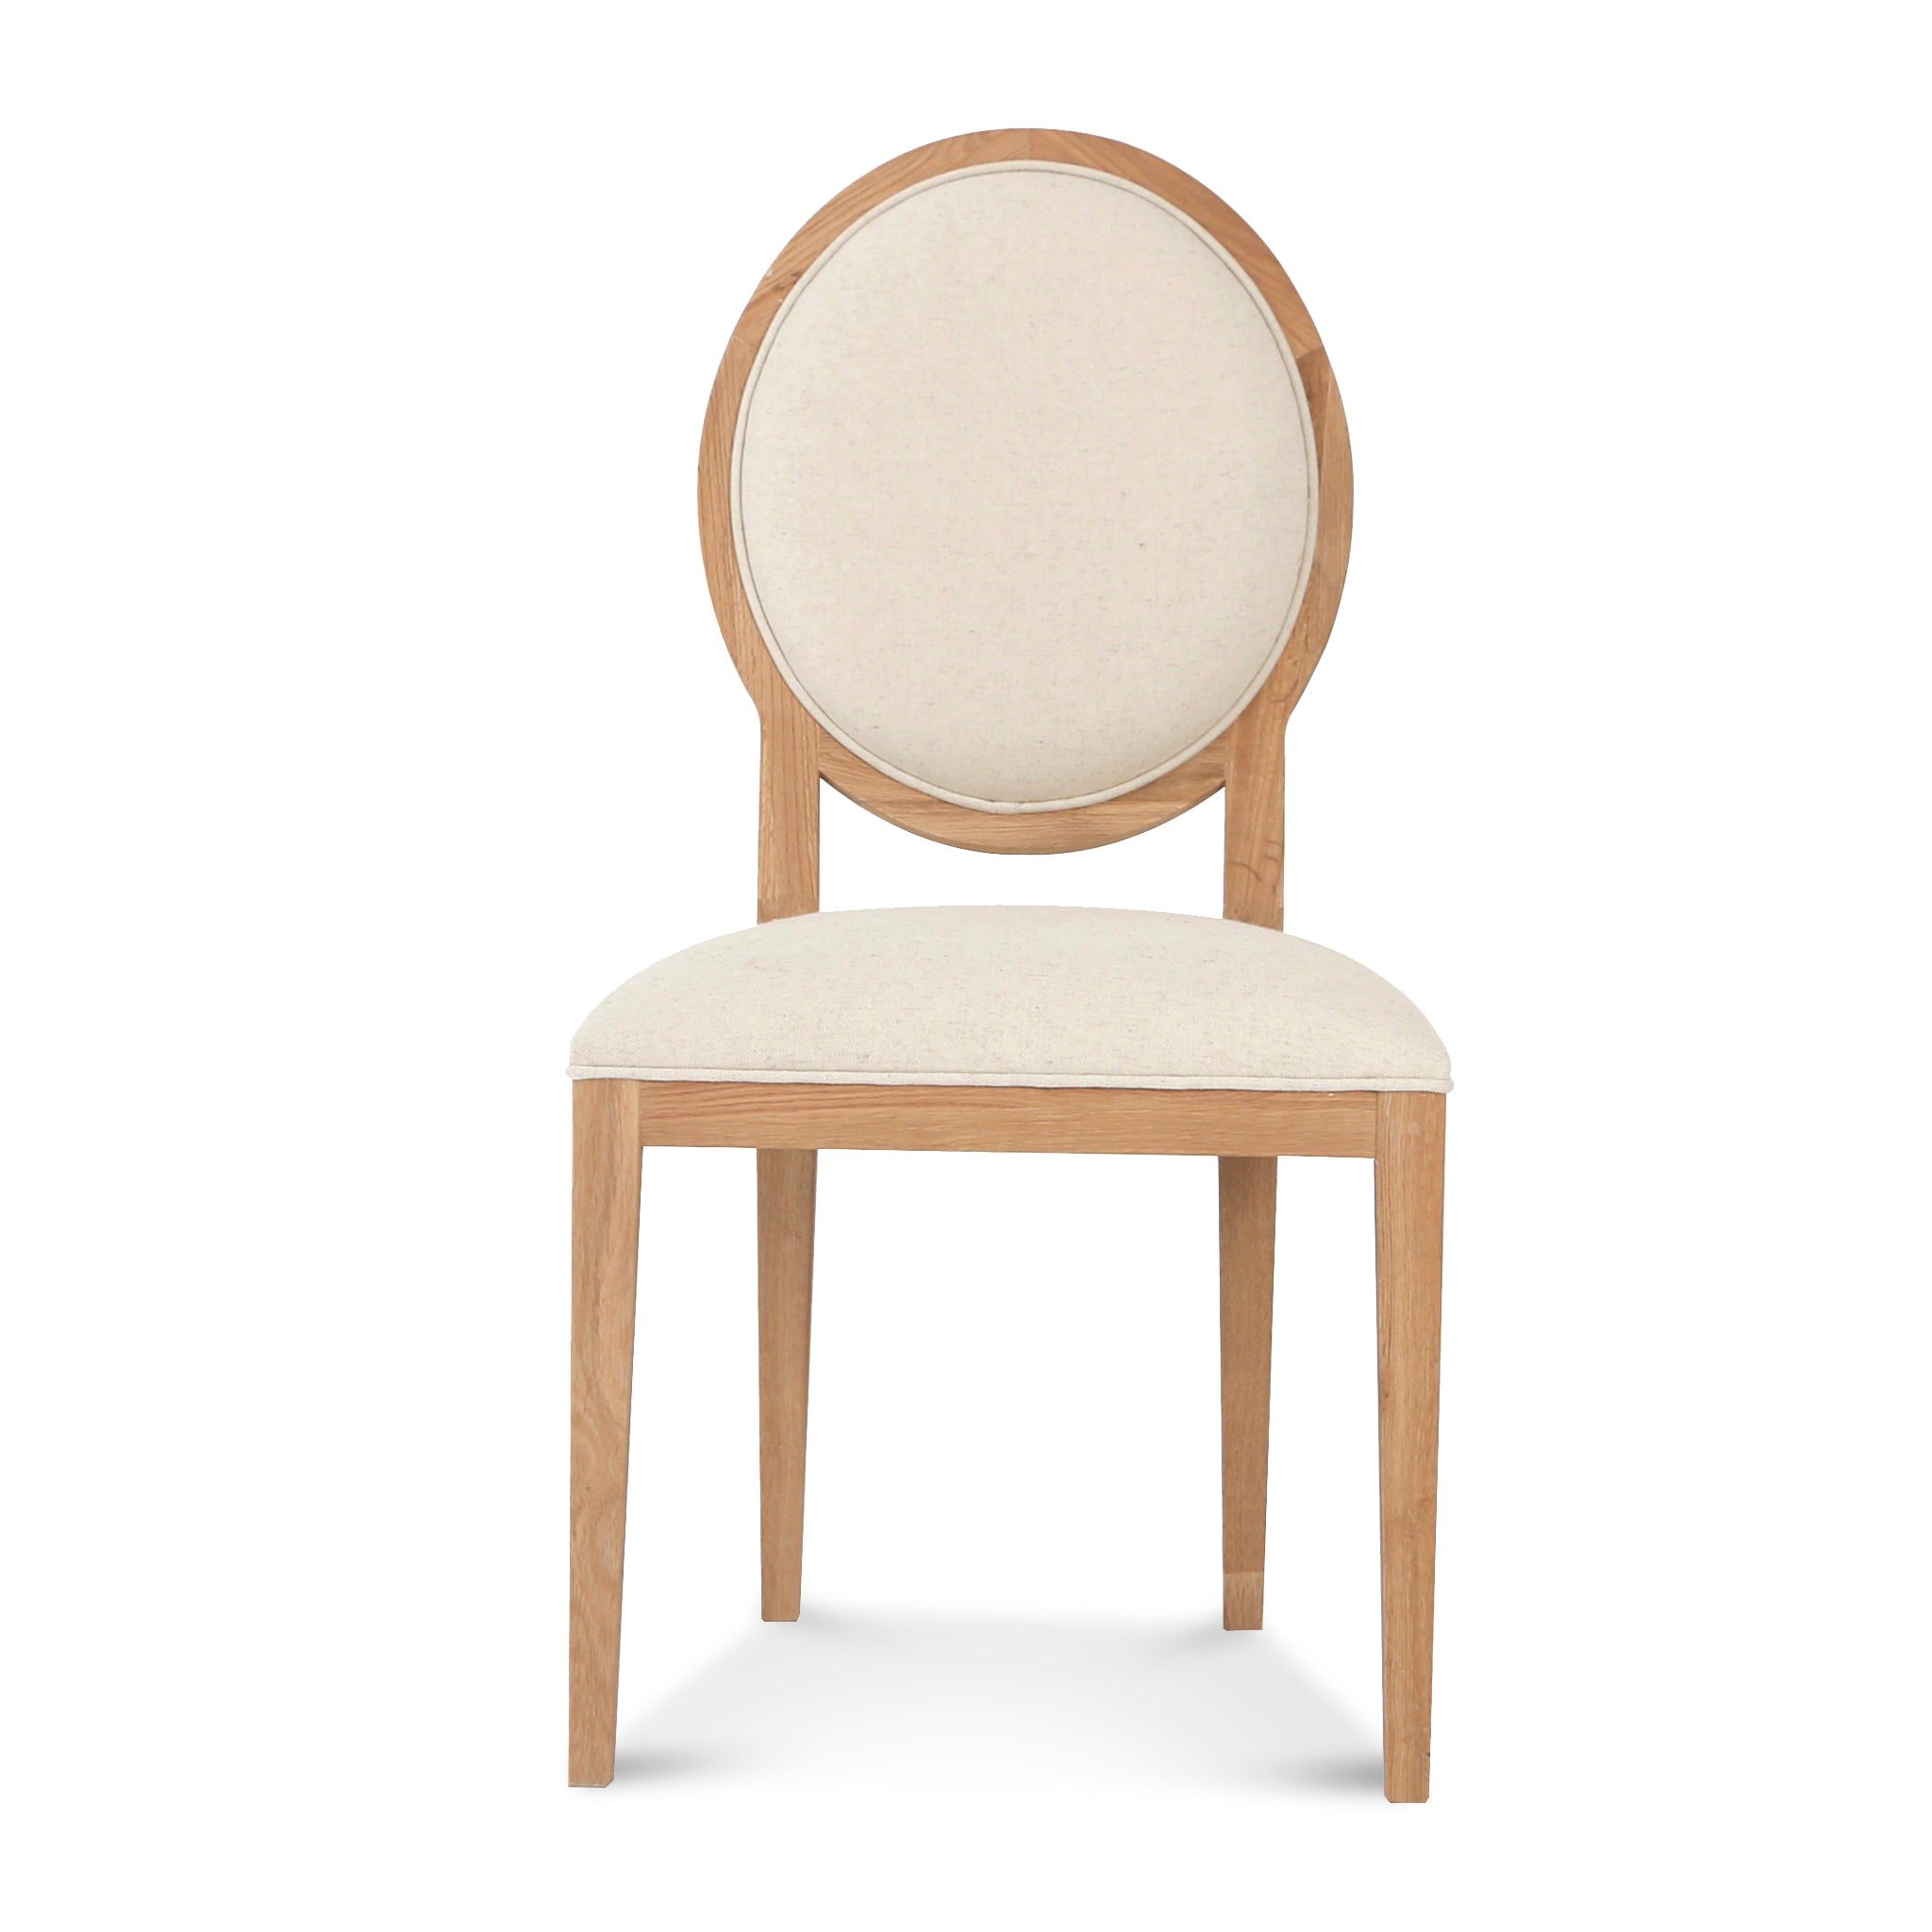 Set of 2 Ayla Fabric Dining Chair - Beige and Natural - Dining Chairs